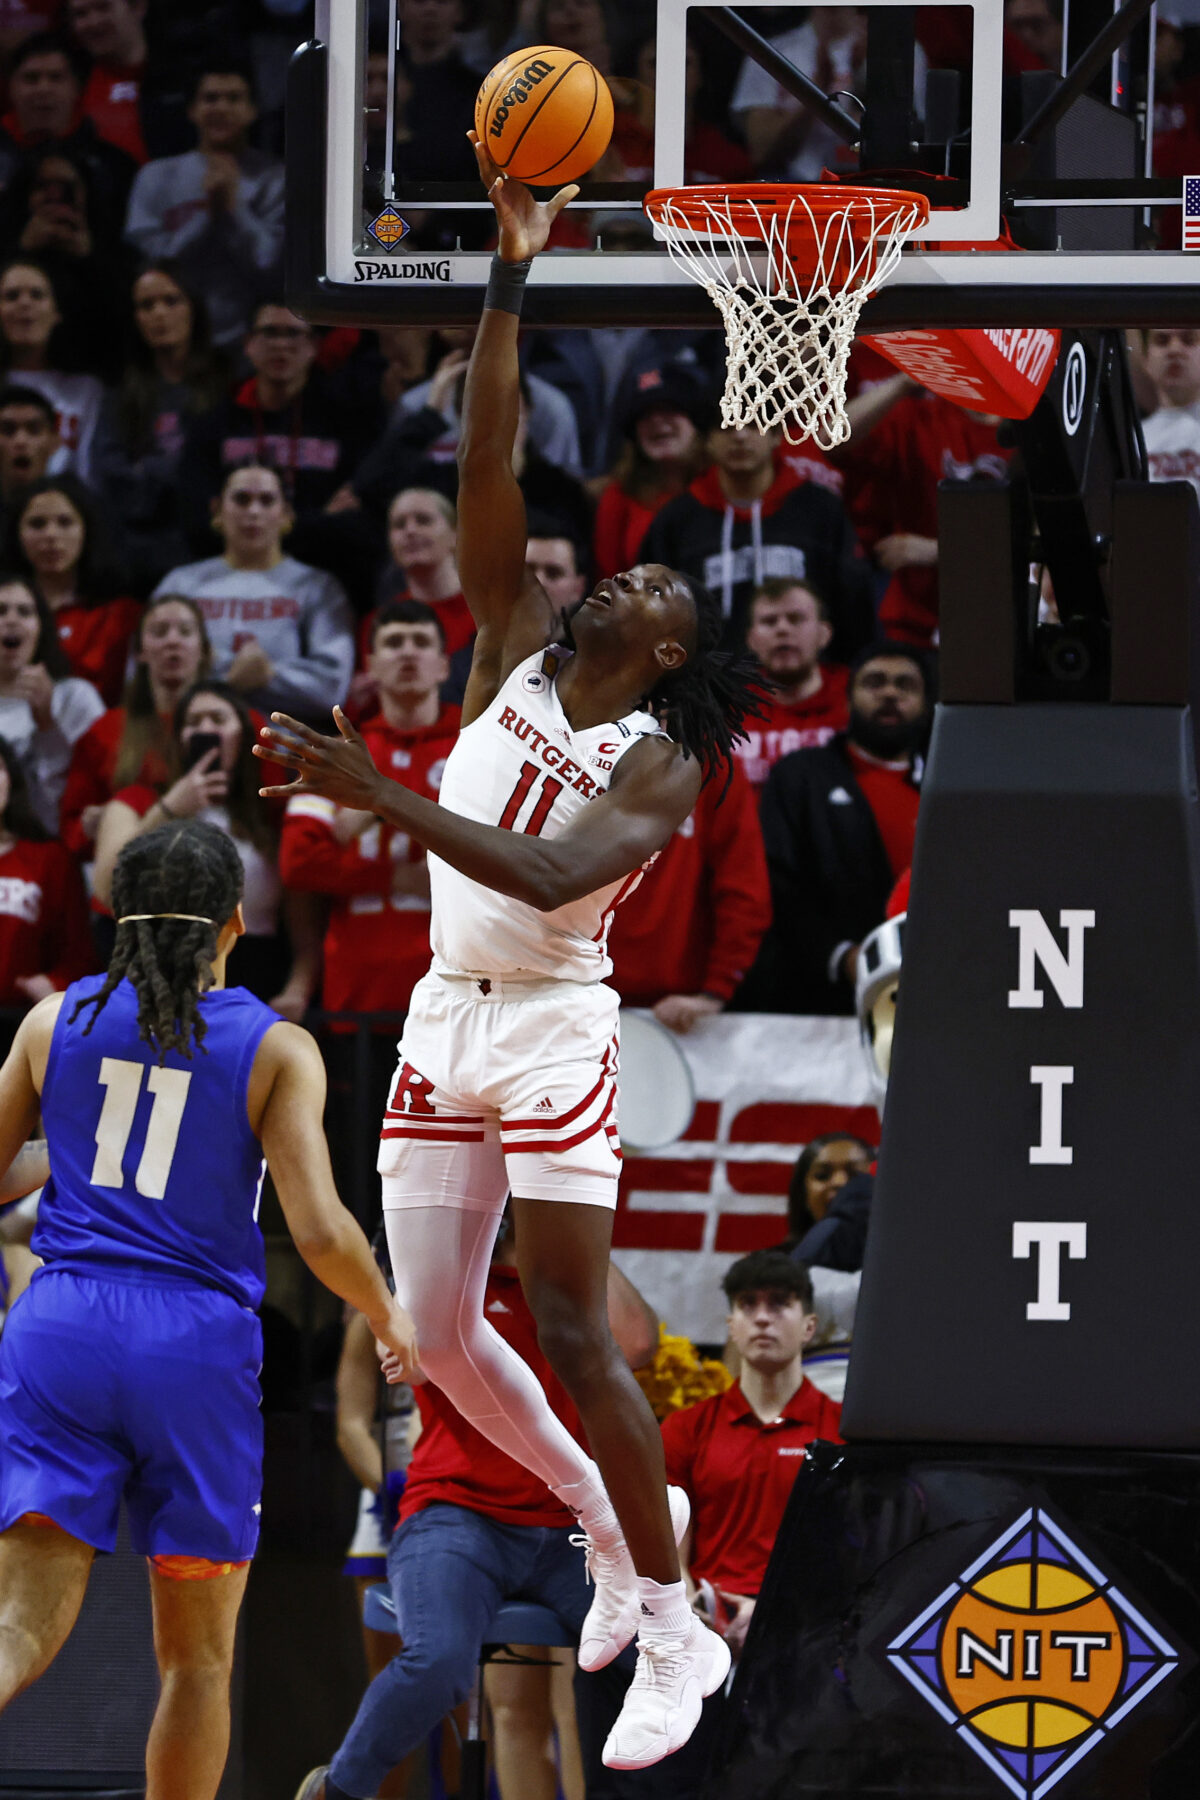 Rutgers proves that the NCAA Tournament selection committee got this one right in NIT loss